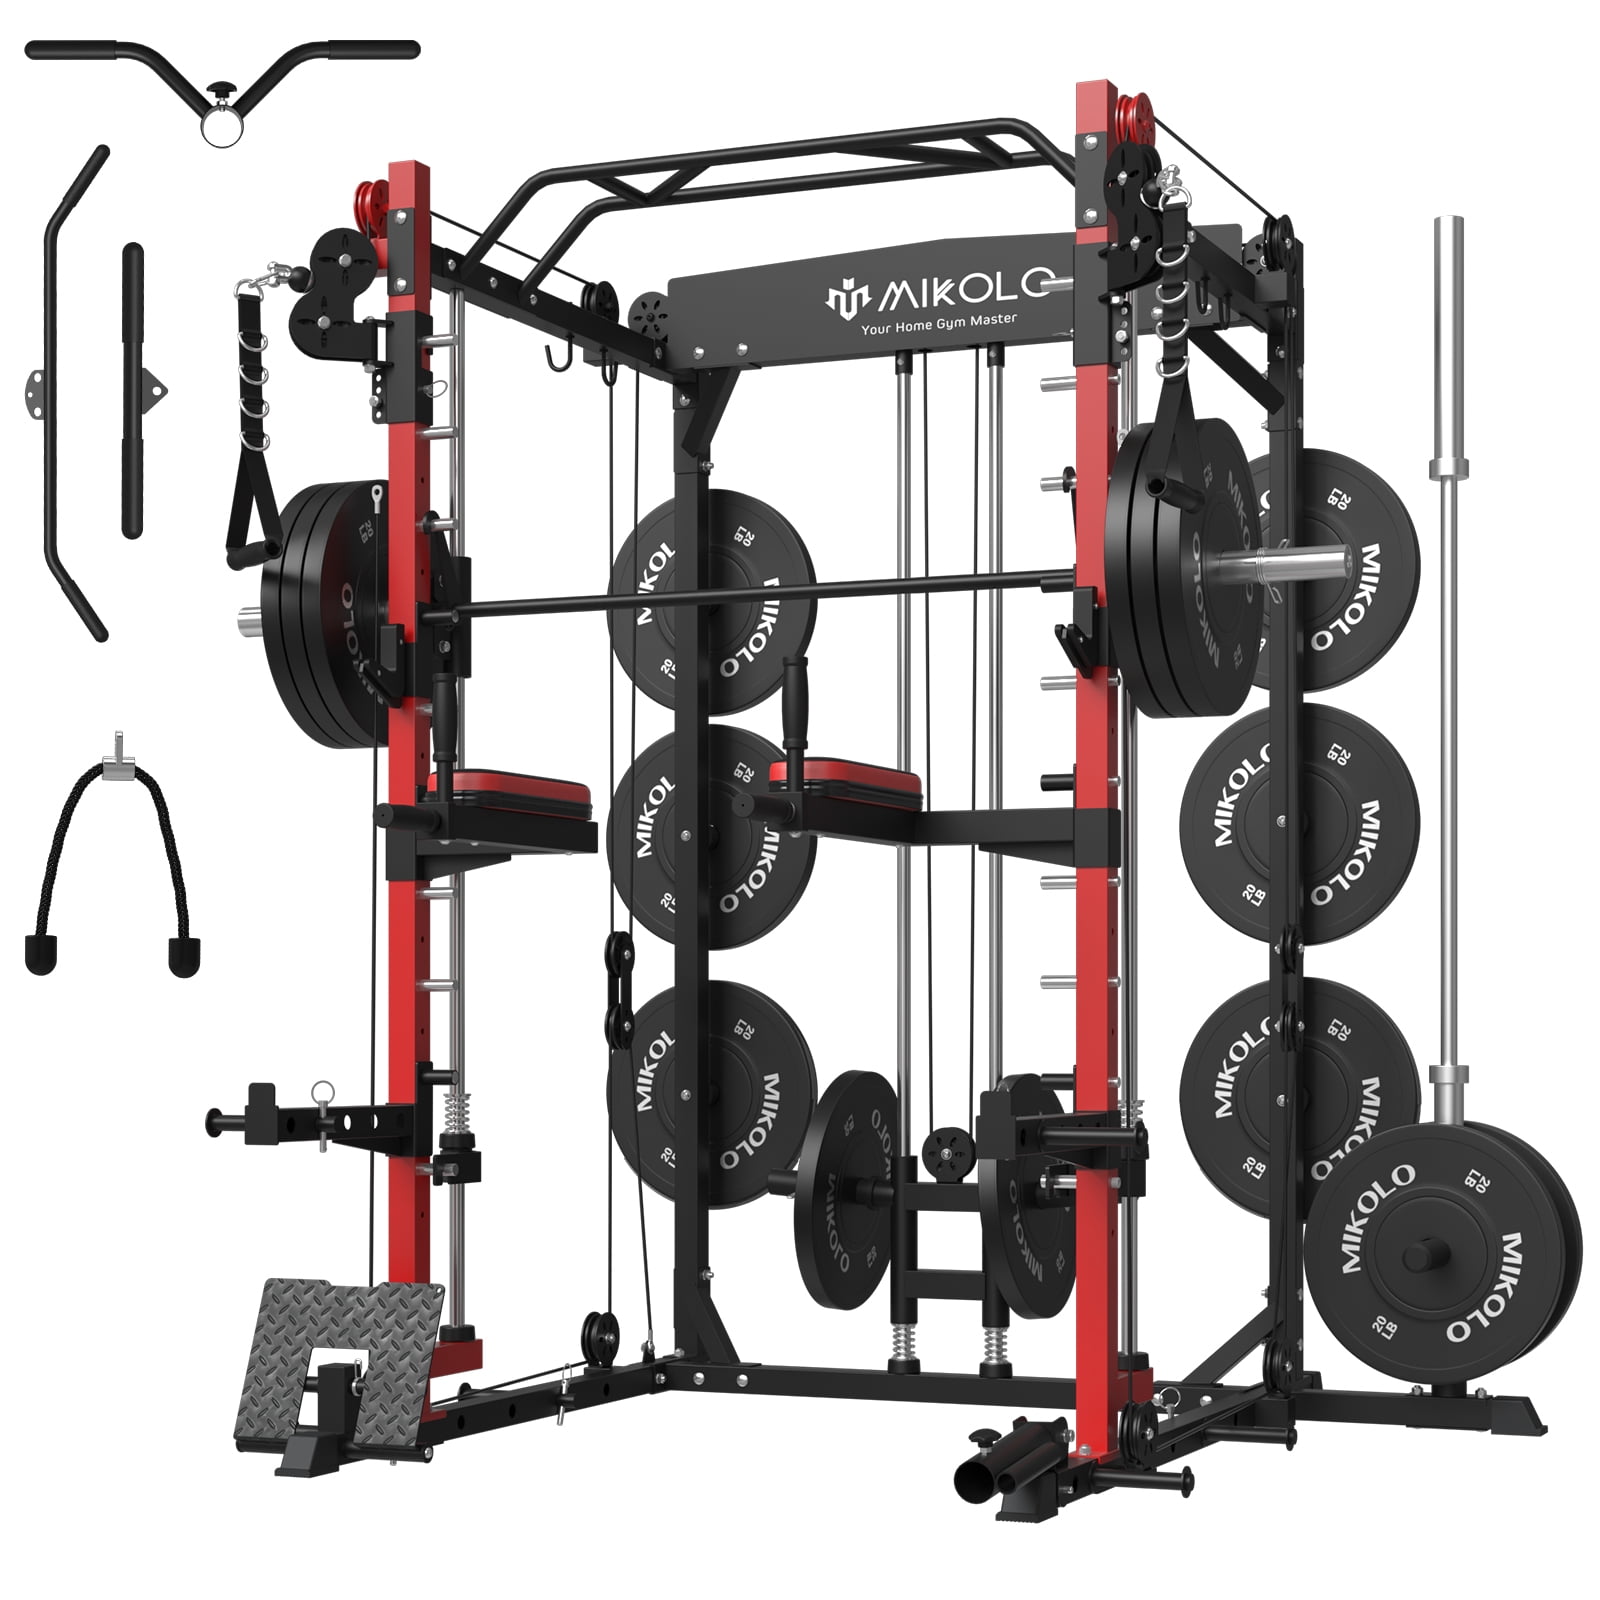 Mikolo Smith Machine Home Gym, 2000lbs Squat Rack with LAT-Pull Down System & Cable Crossover Machine, Training Equipment